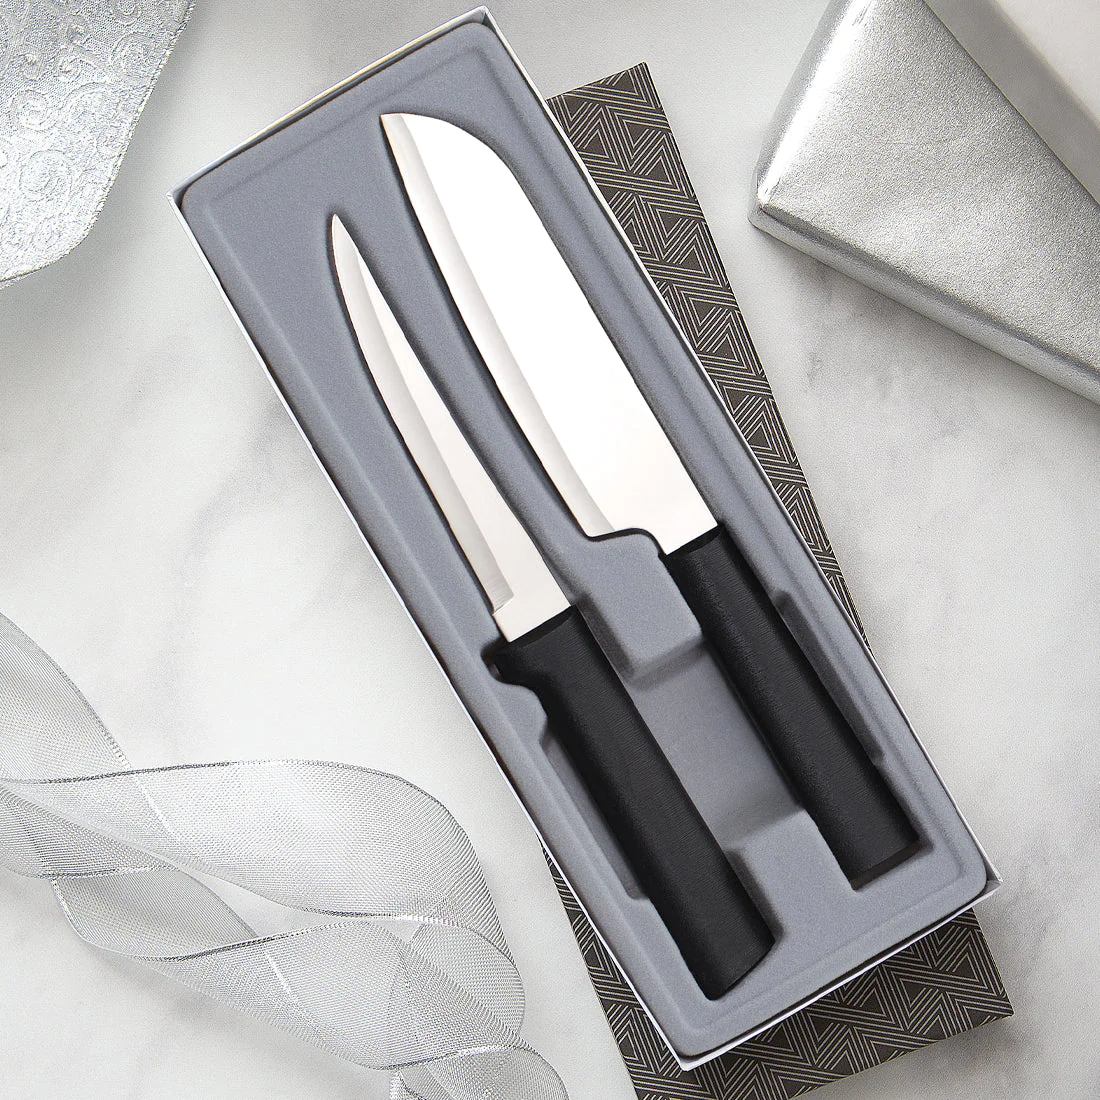 Rada Cutlery 2-Piece Paring Knife Set and Knife Sharpener - Stainless Steel Blades with Aluminum Handles